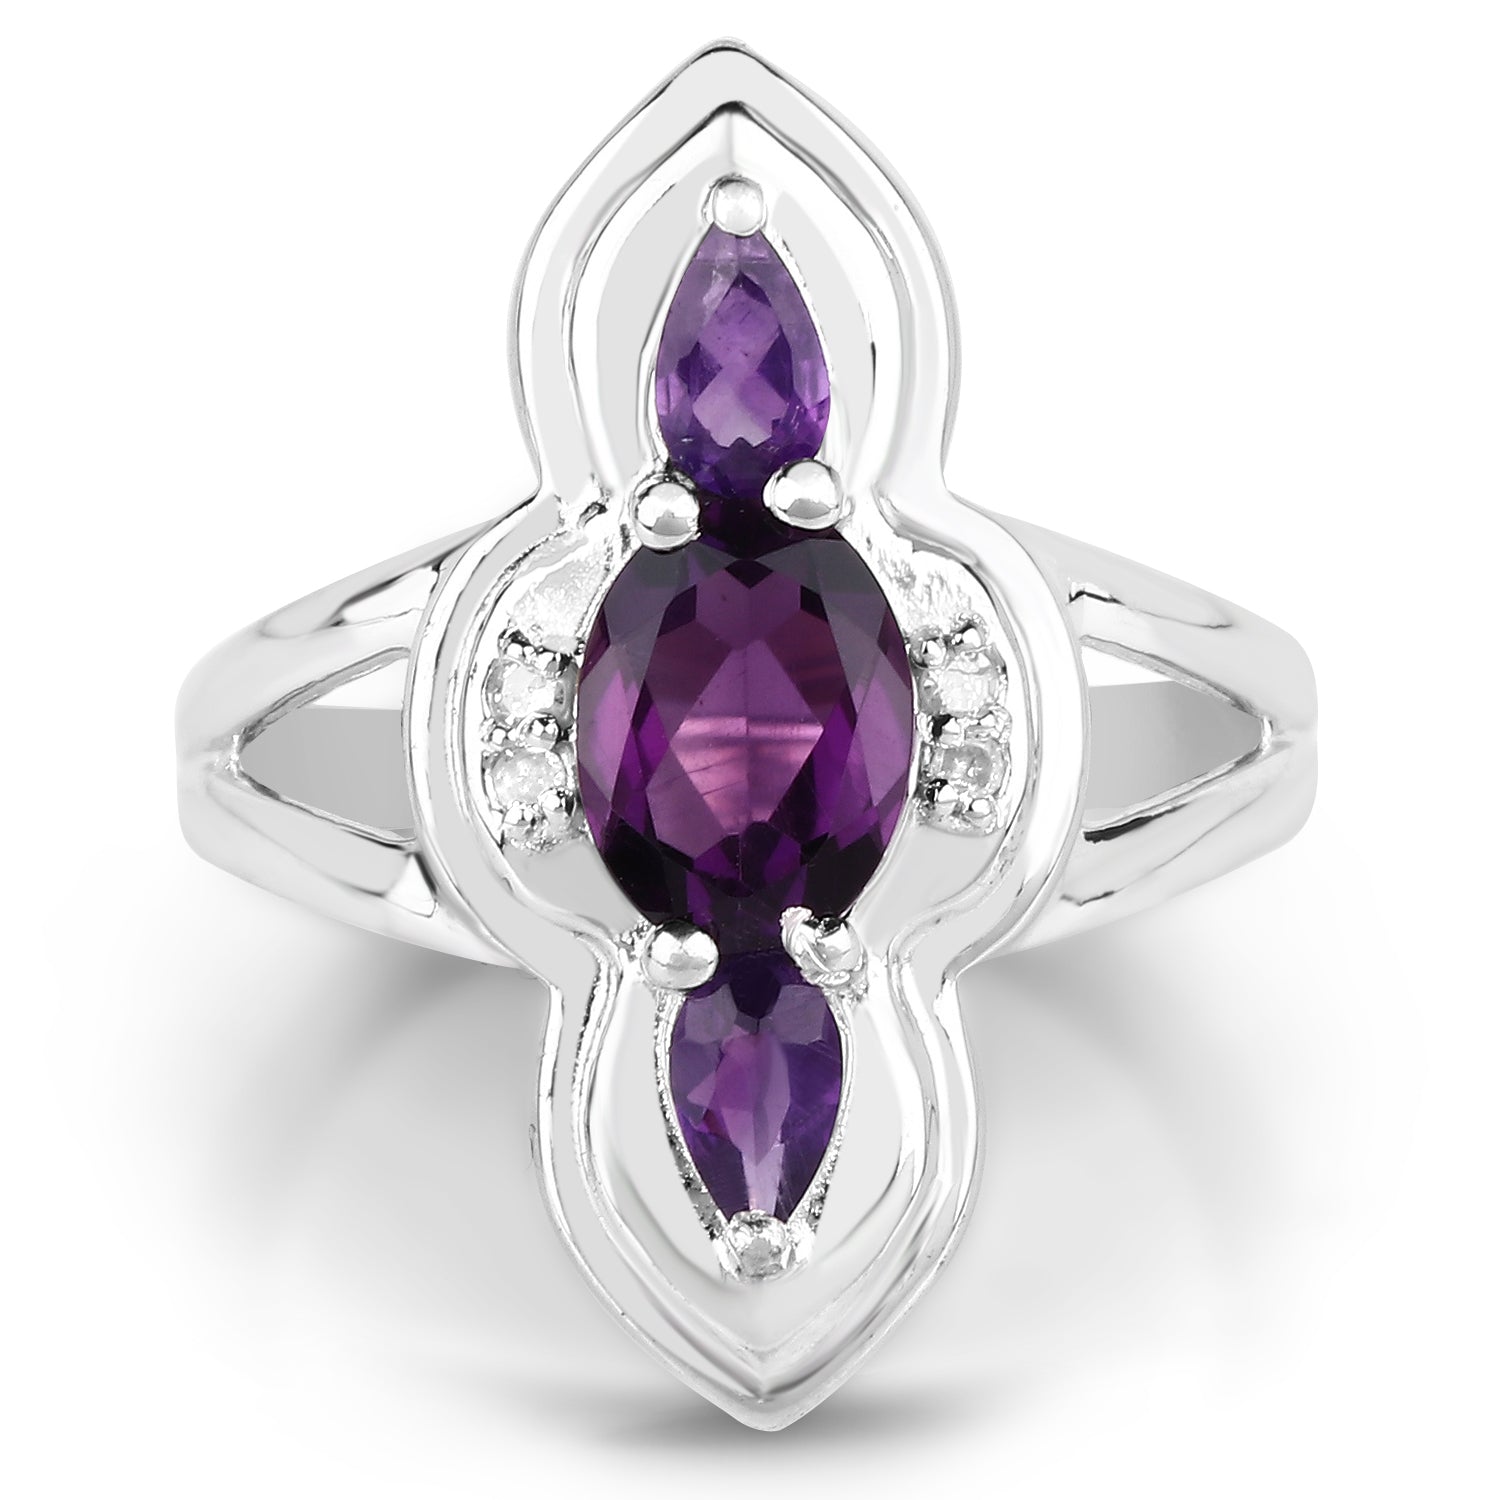 Genuine Amethyst and White Diamond Sterling Silver Ring - 1.58 ctw, February Birthstone, 3 Stone Design for Women, Gift for Sister, Mother or Her Bijou Her